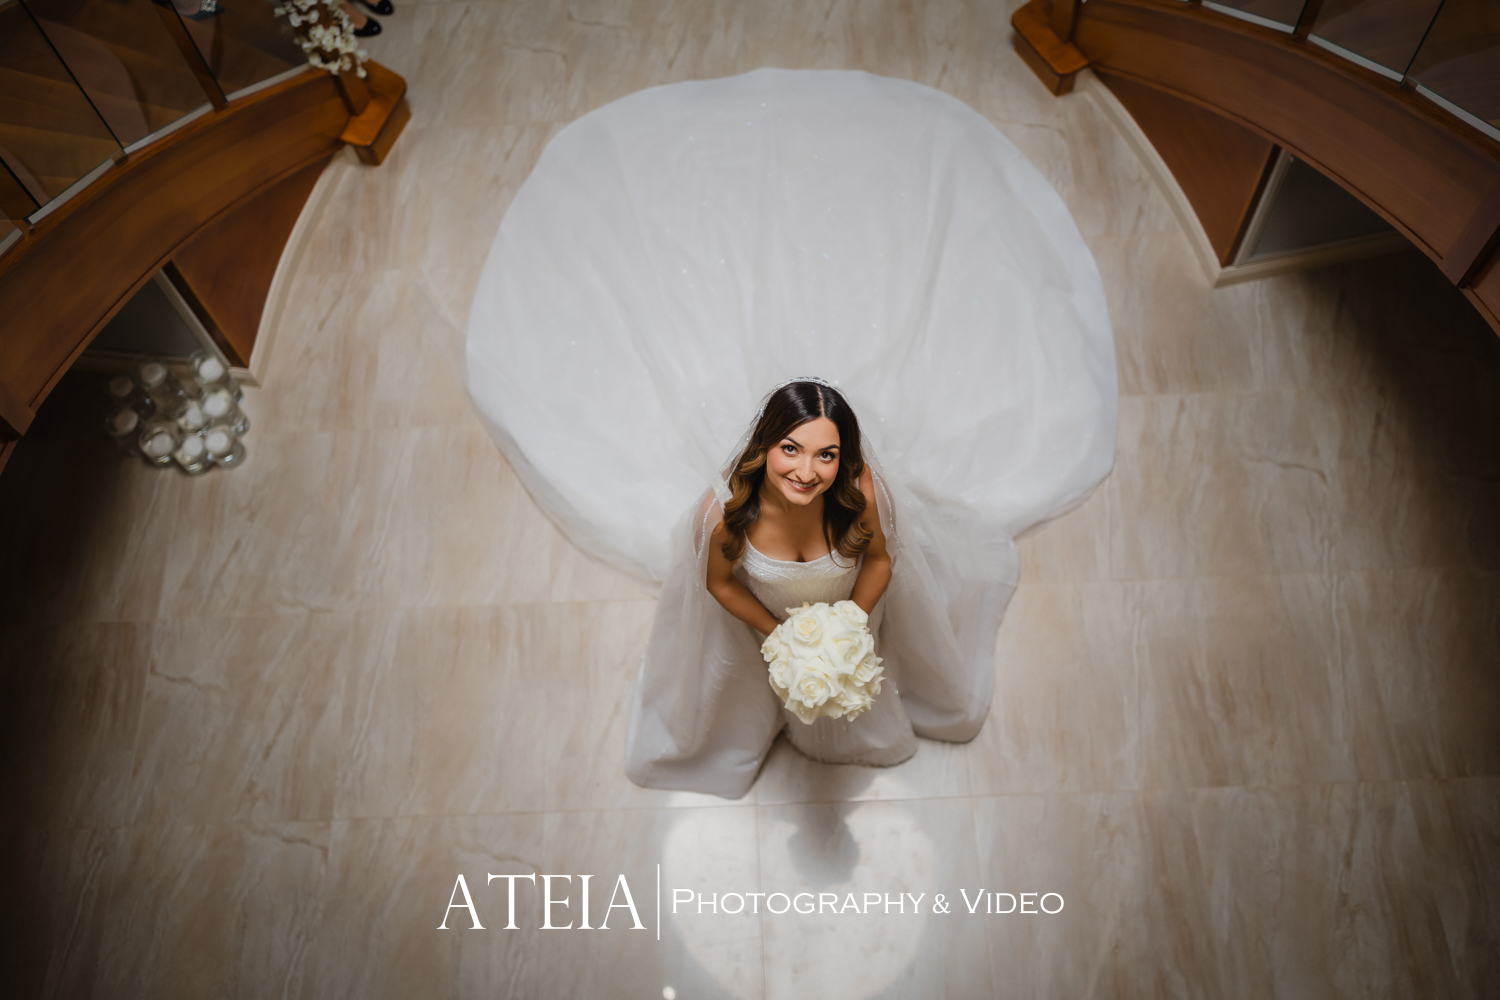 , Maria and Noor&#8217;s wedding photography at Melbourne Town Hall captured by ATEIA Photography &#038; Video